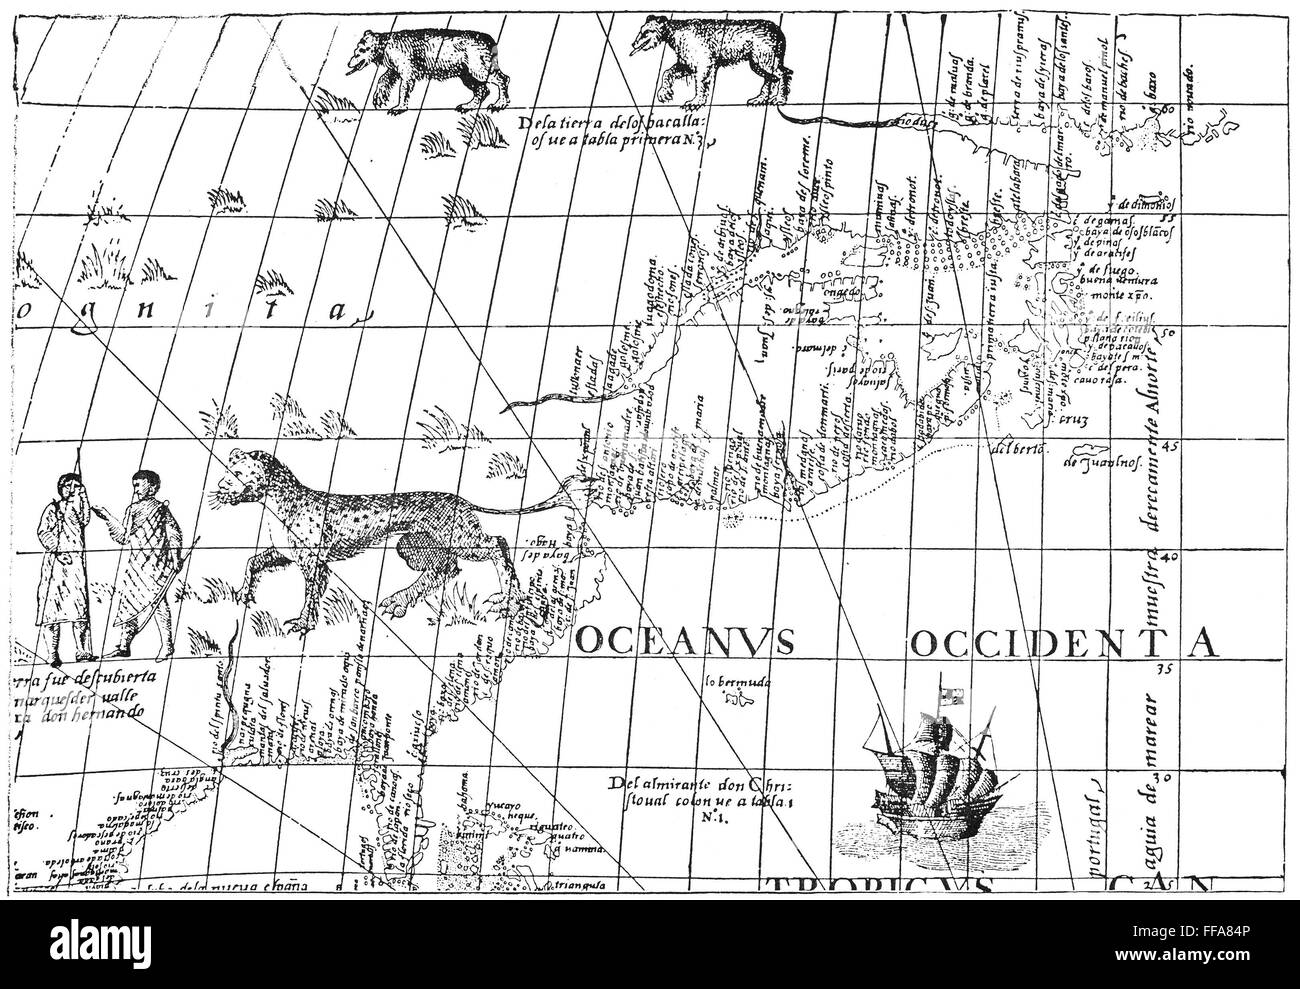 CABOT: NEW WORLD MAP, 1544. /nDetail from Sebastian Cabot's 1544 map of the New World. Stock Photo